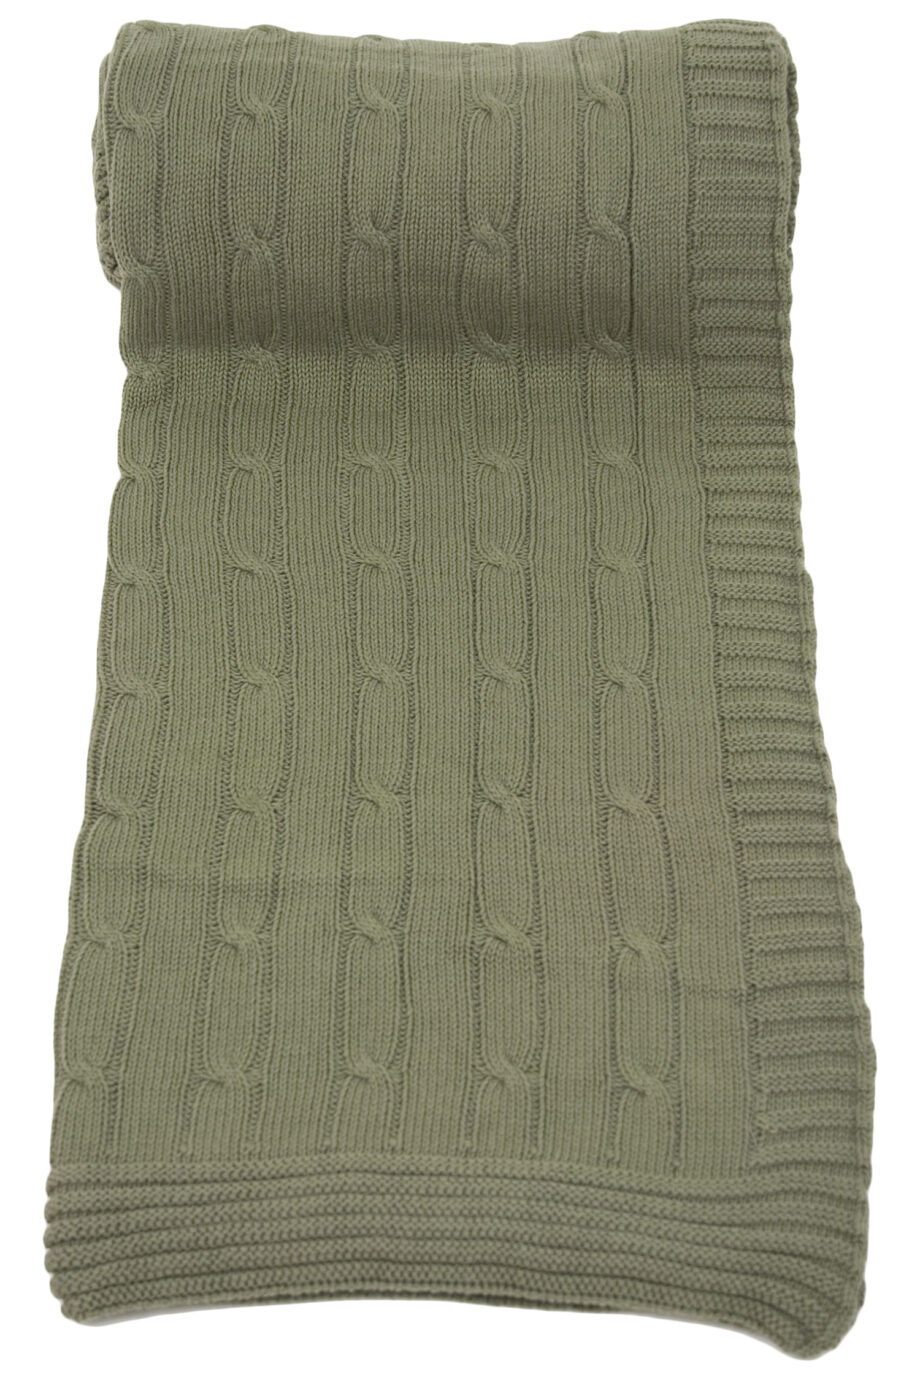 twist olive green knitted cotton throw xlarge